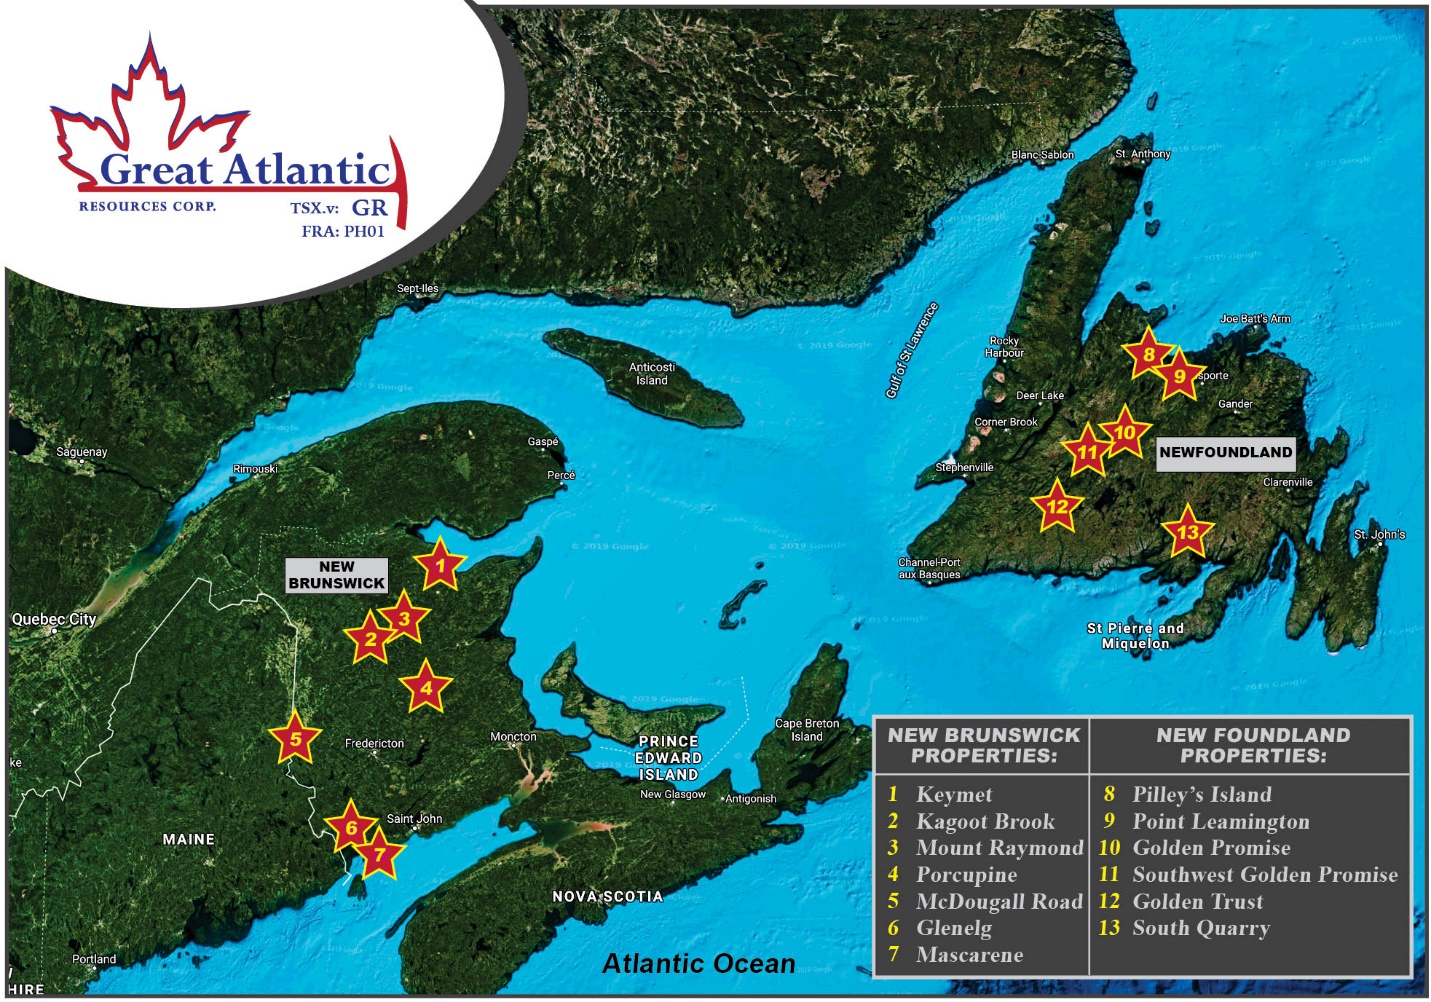 Great Atlantic Resources Corp., Wednesday, July 8, 2020, Press release picture